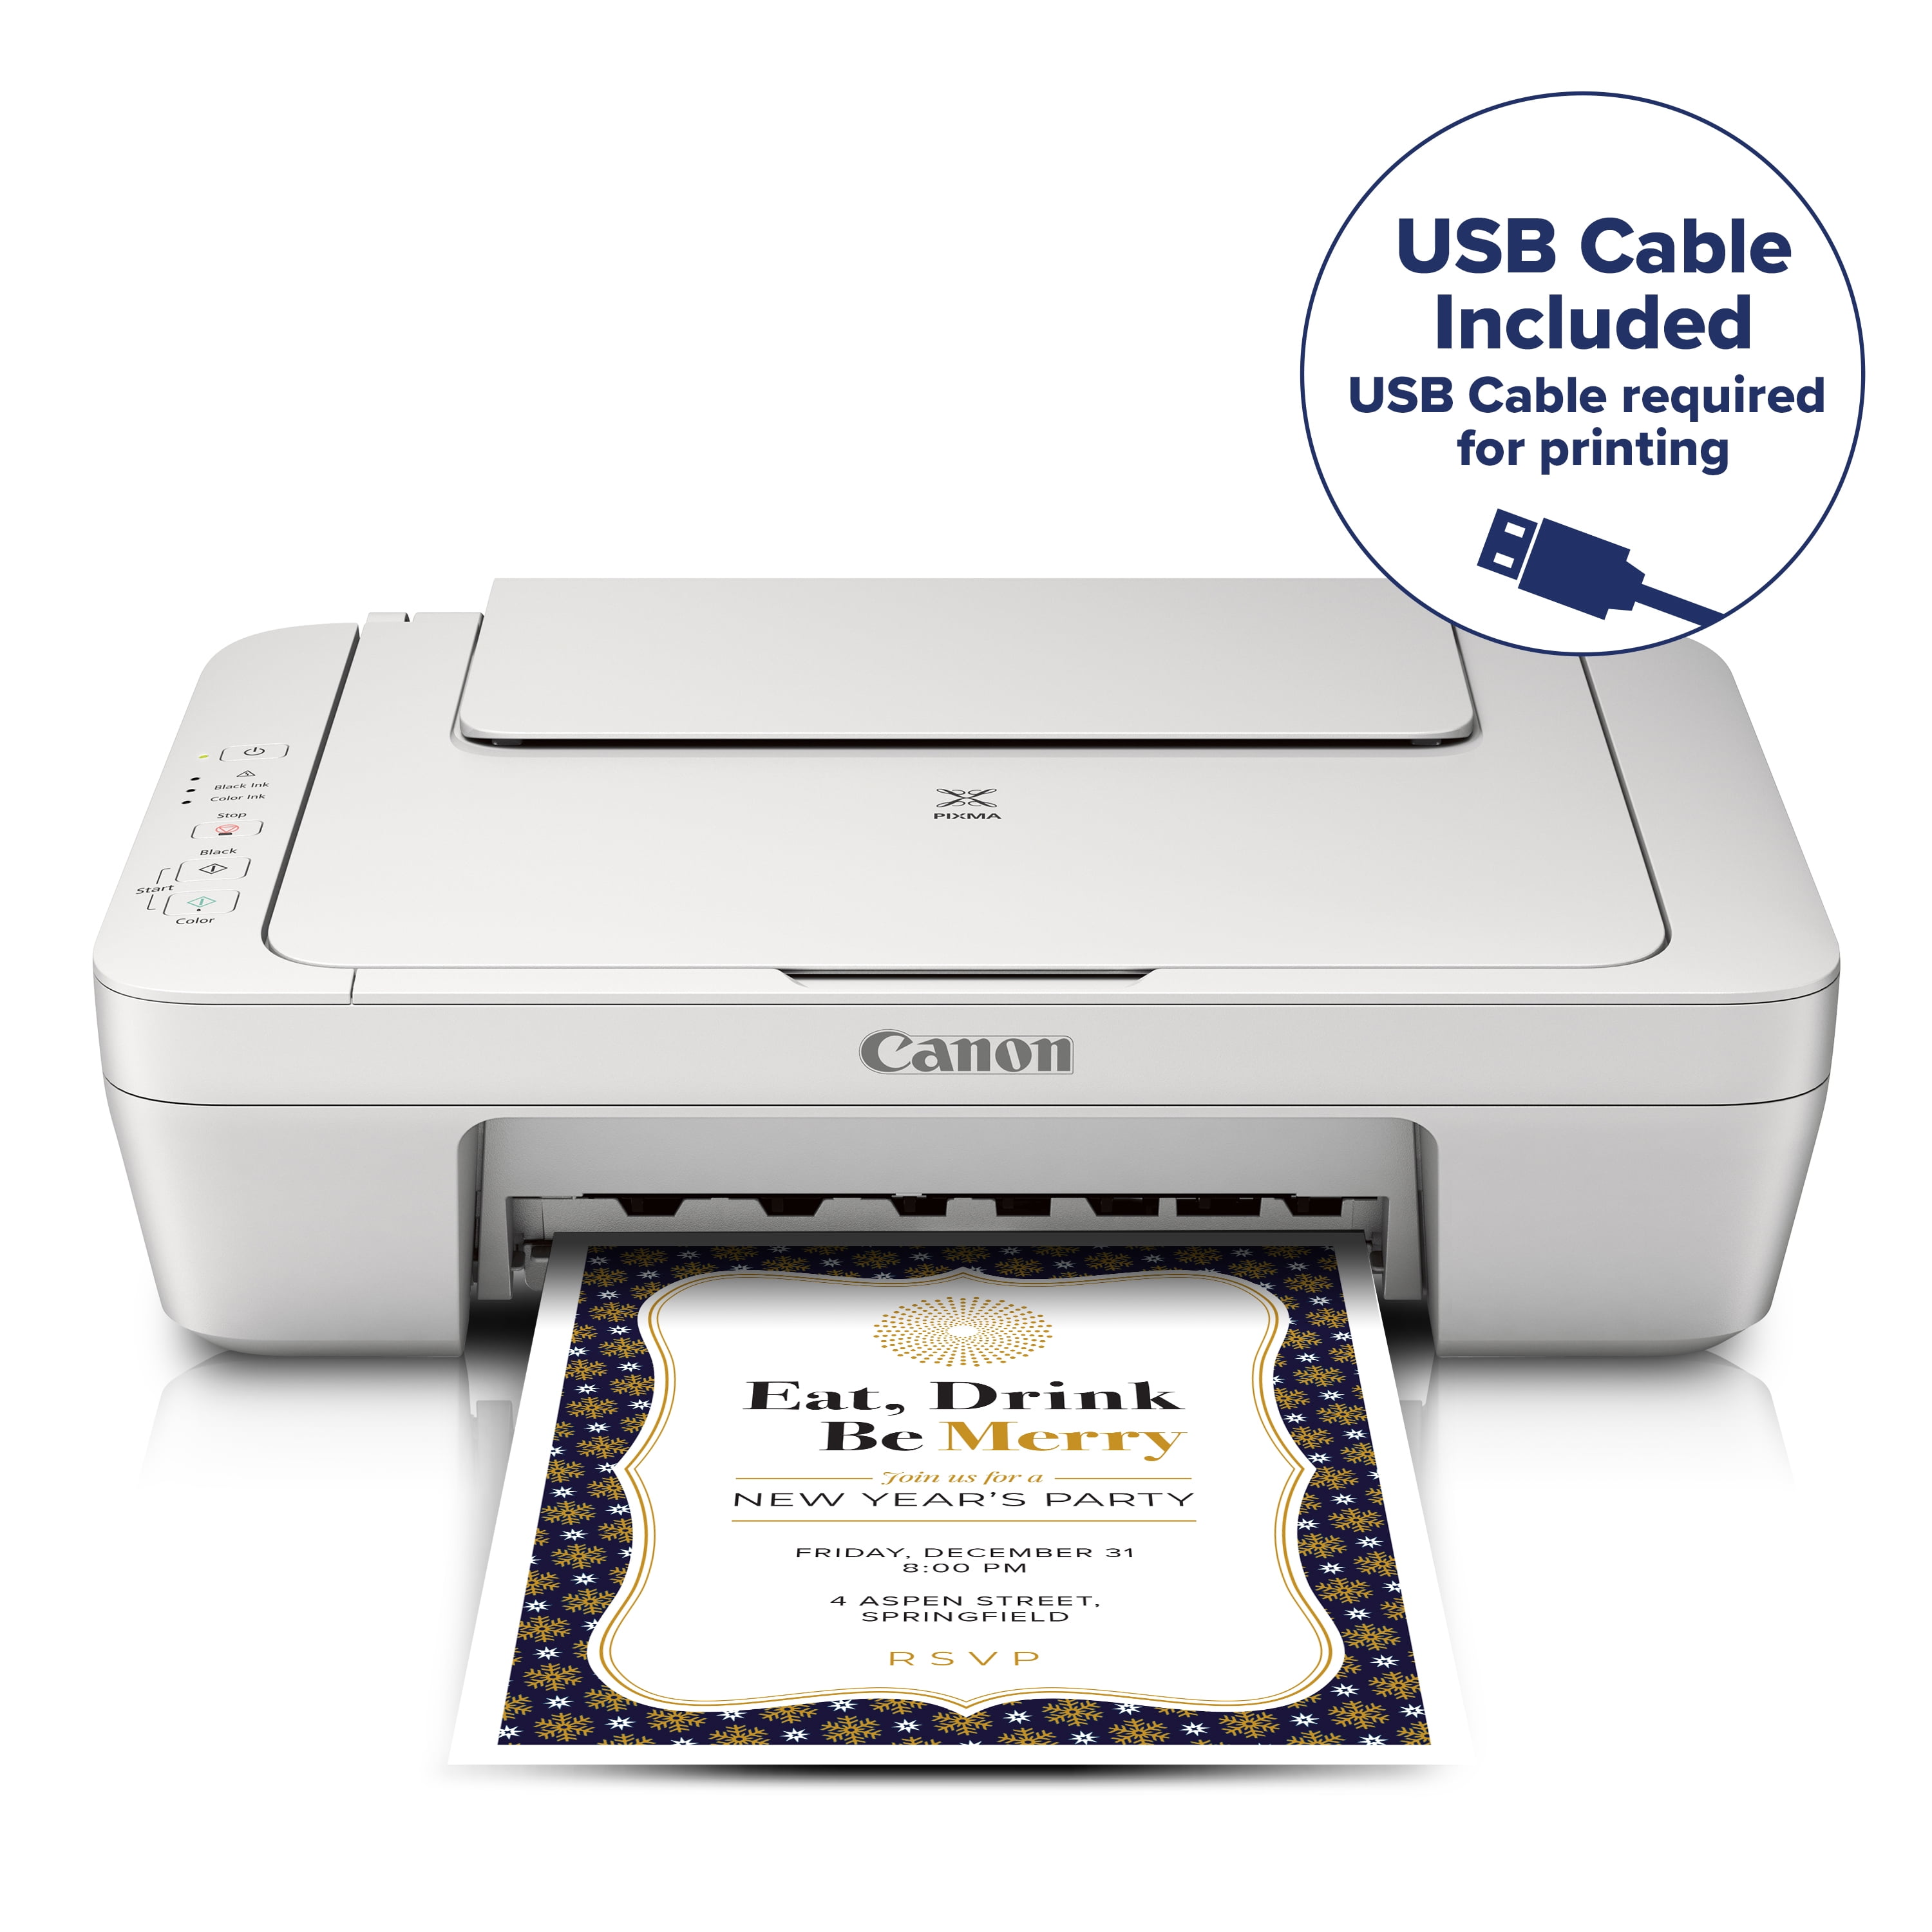 kirurg Uovertruffen Karu Canon PIXMA MG2522 Wired All-in-One Color Inkjet Printer [USB Cable  Included], White - Walmart.com